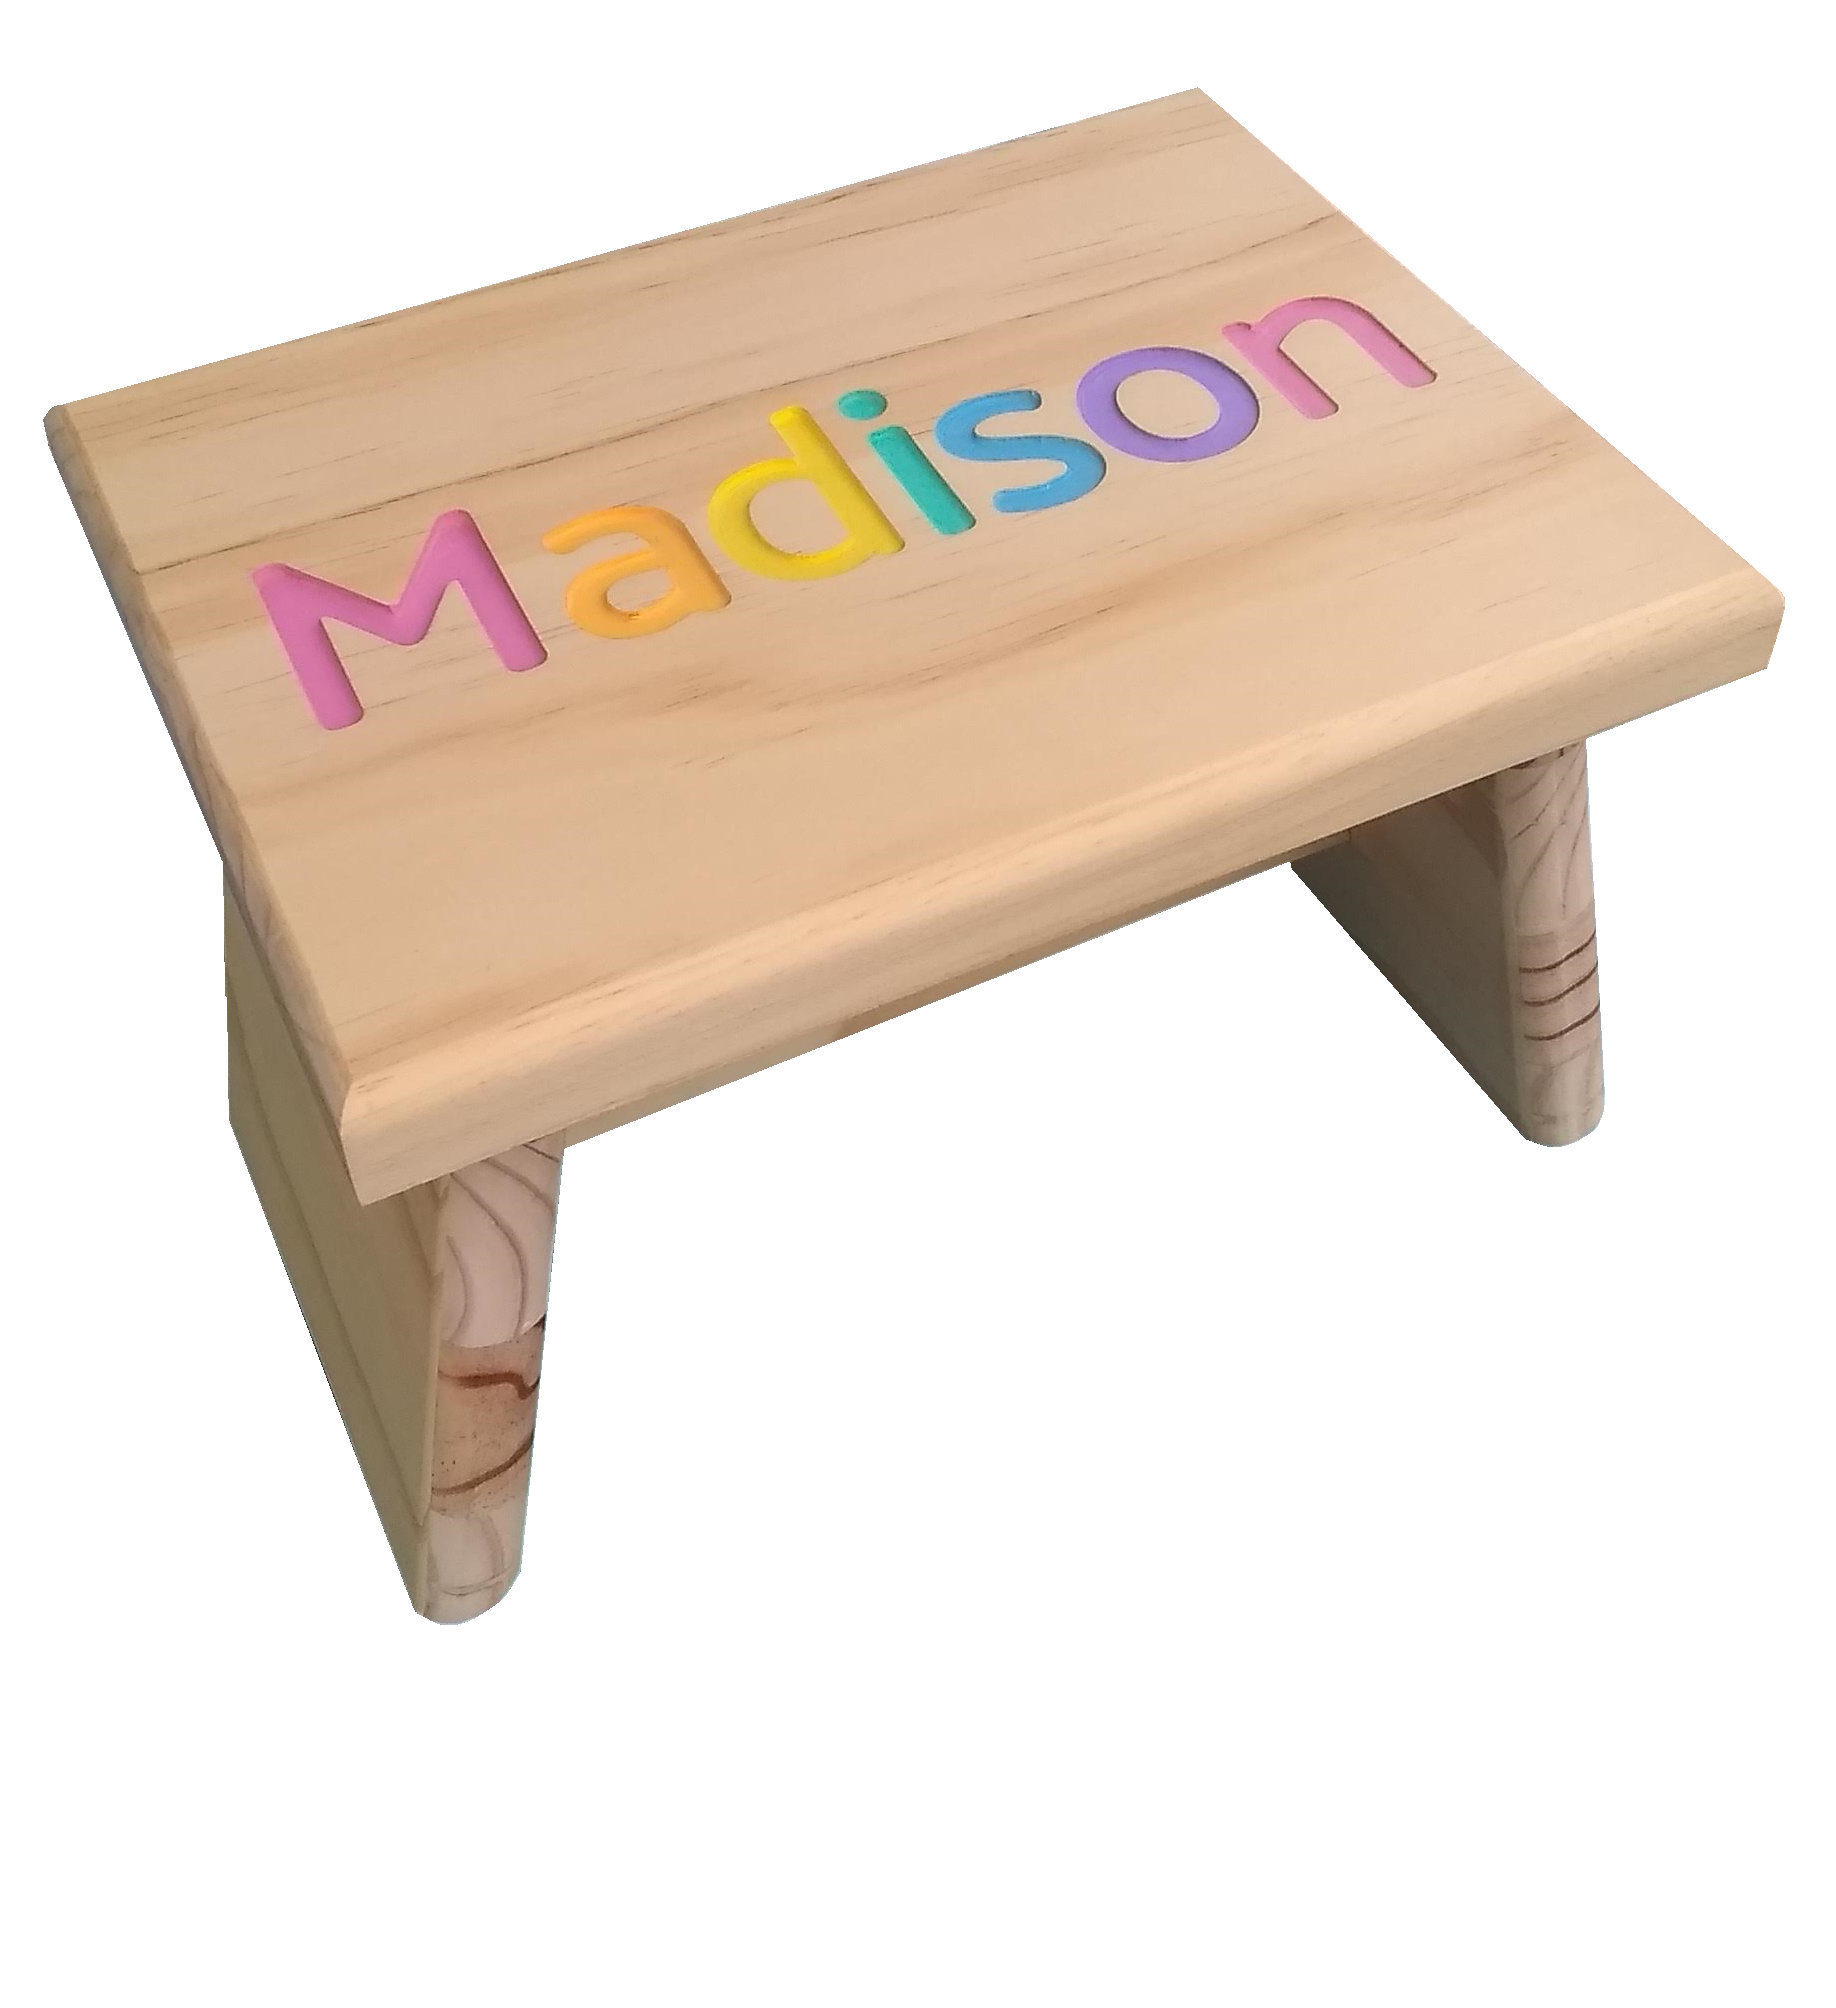 Personalized Gift for Kids Wood Stool Step Stool Kids Step Stool Personalized Kids Stepping Stool 